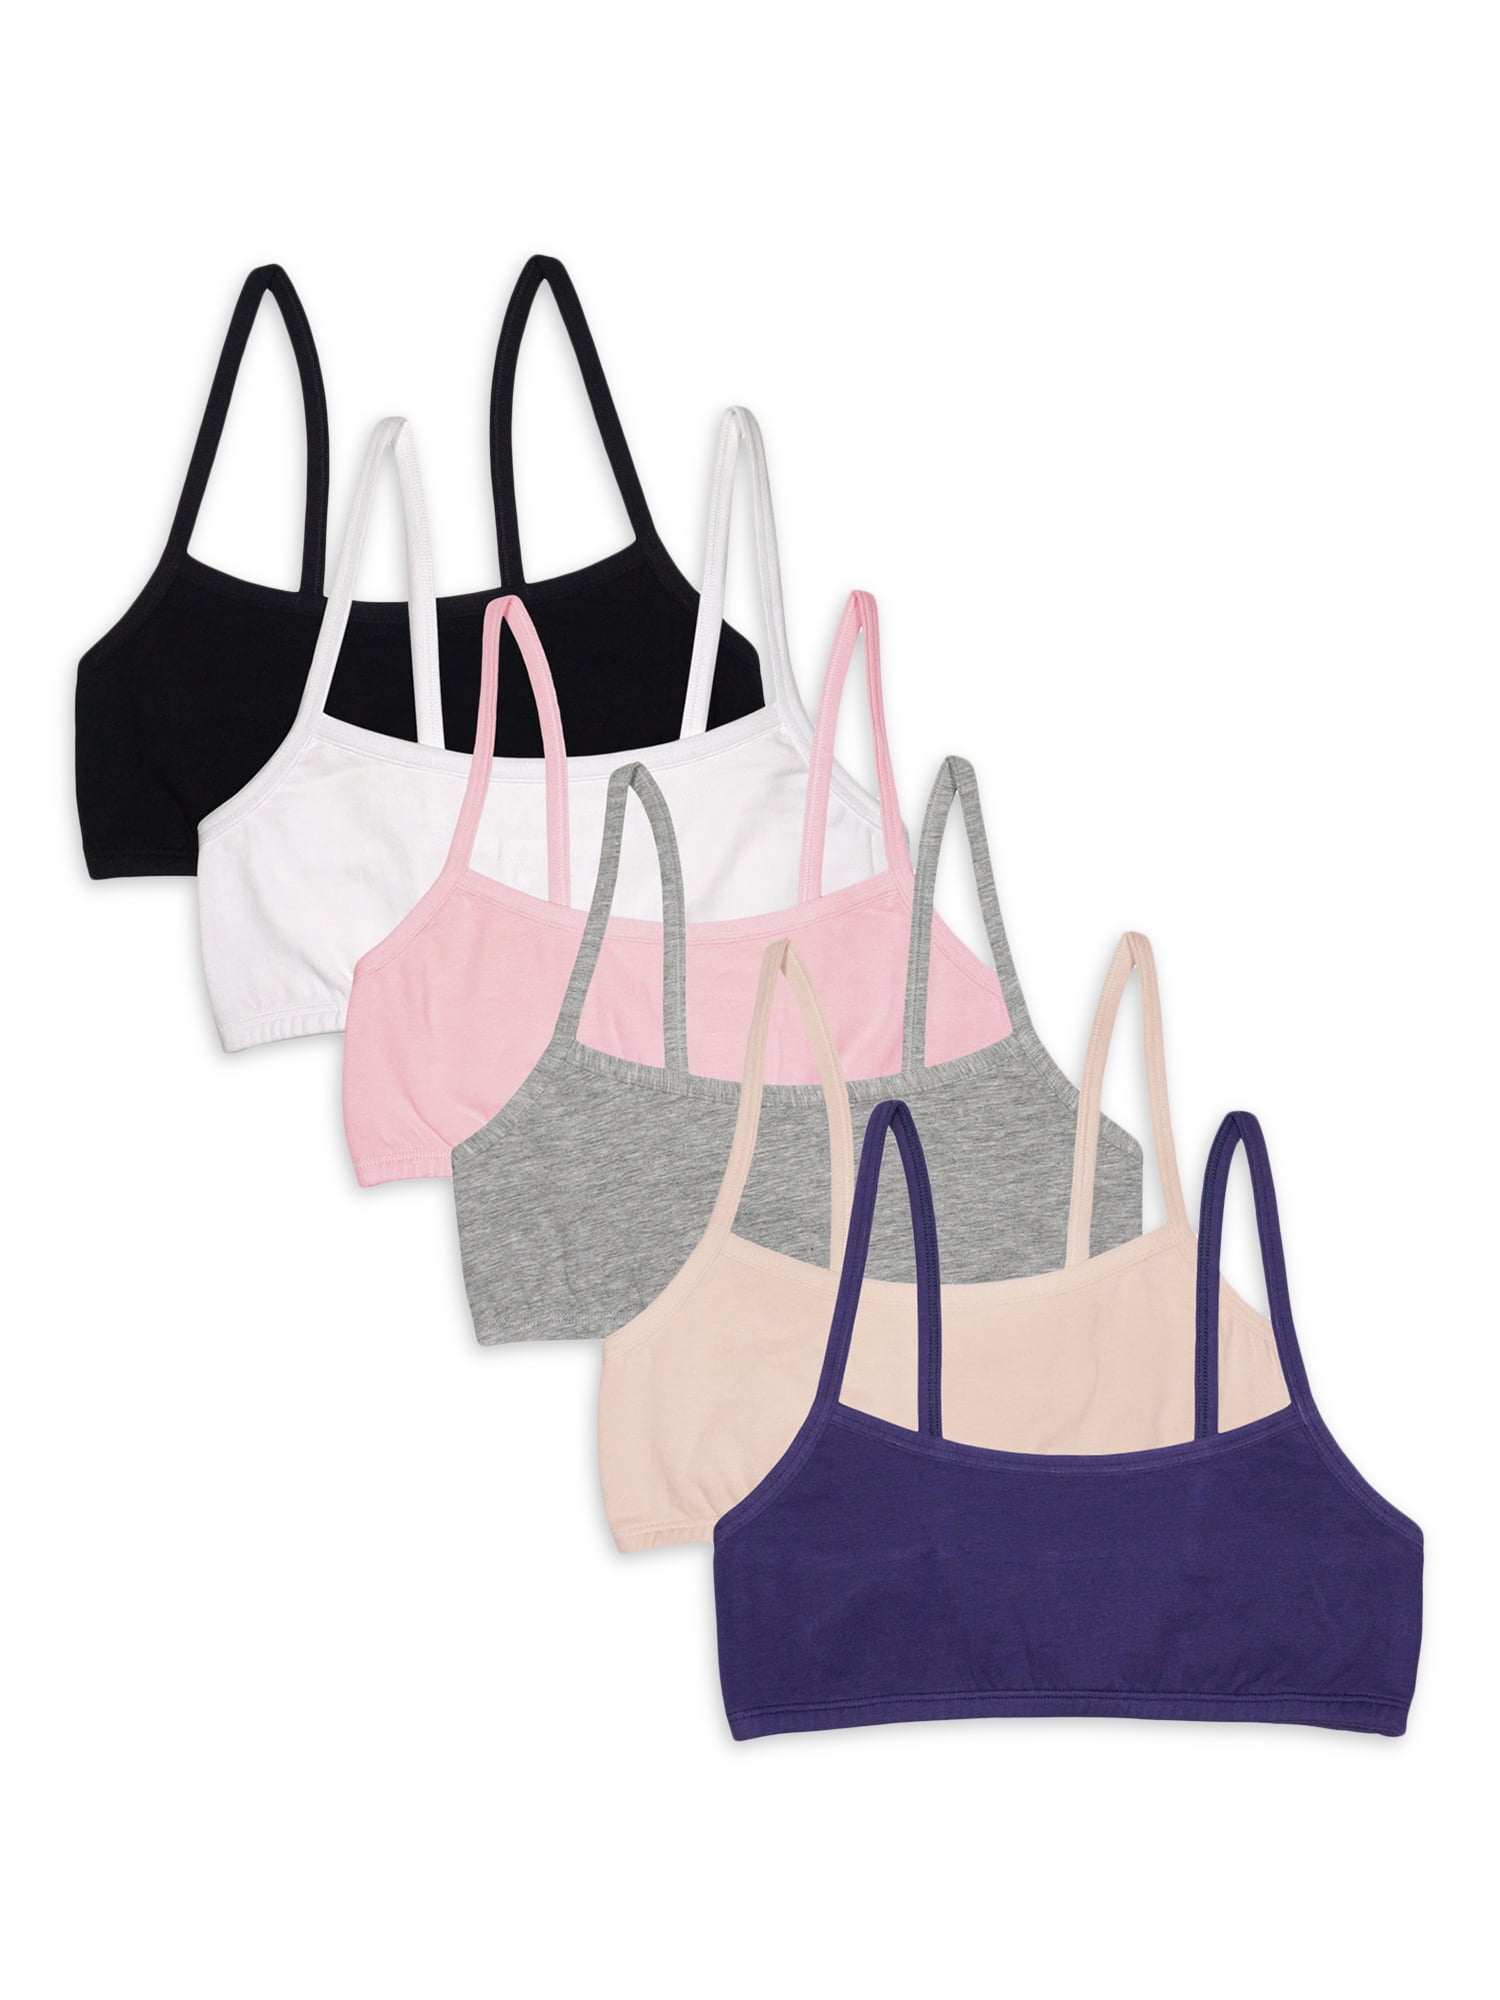 Highly Rated Fruit of the Loom 3-Packs of Sports Bras from $6.18 on Walmart.com